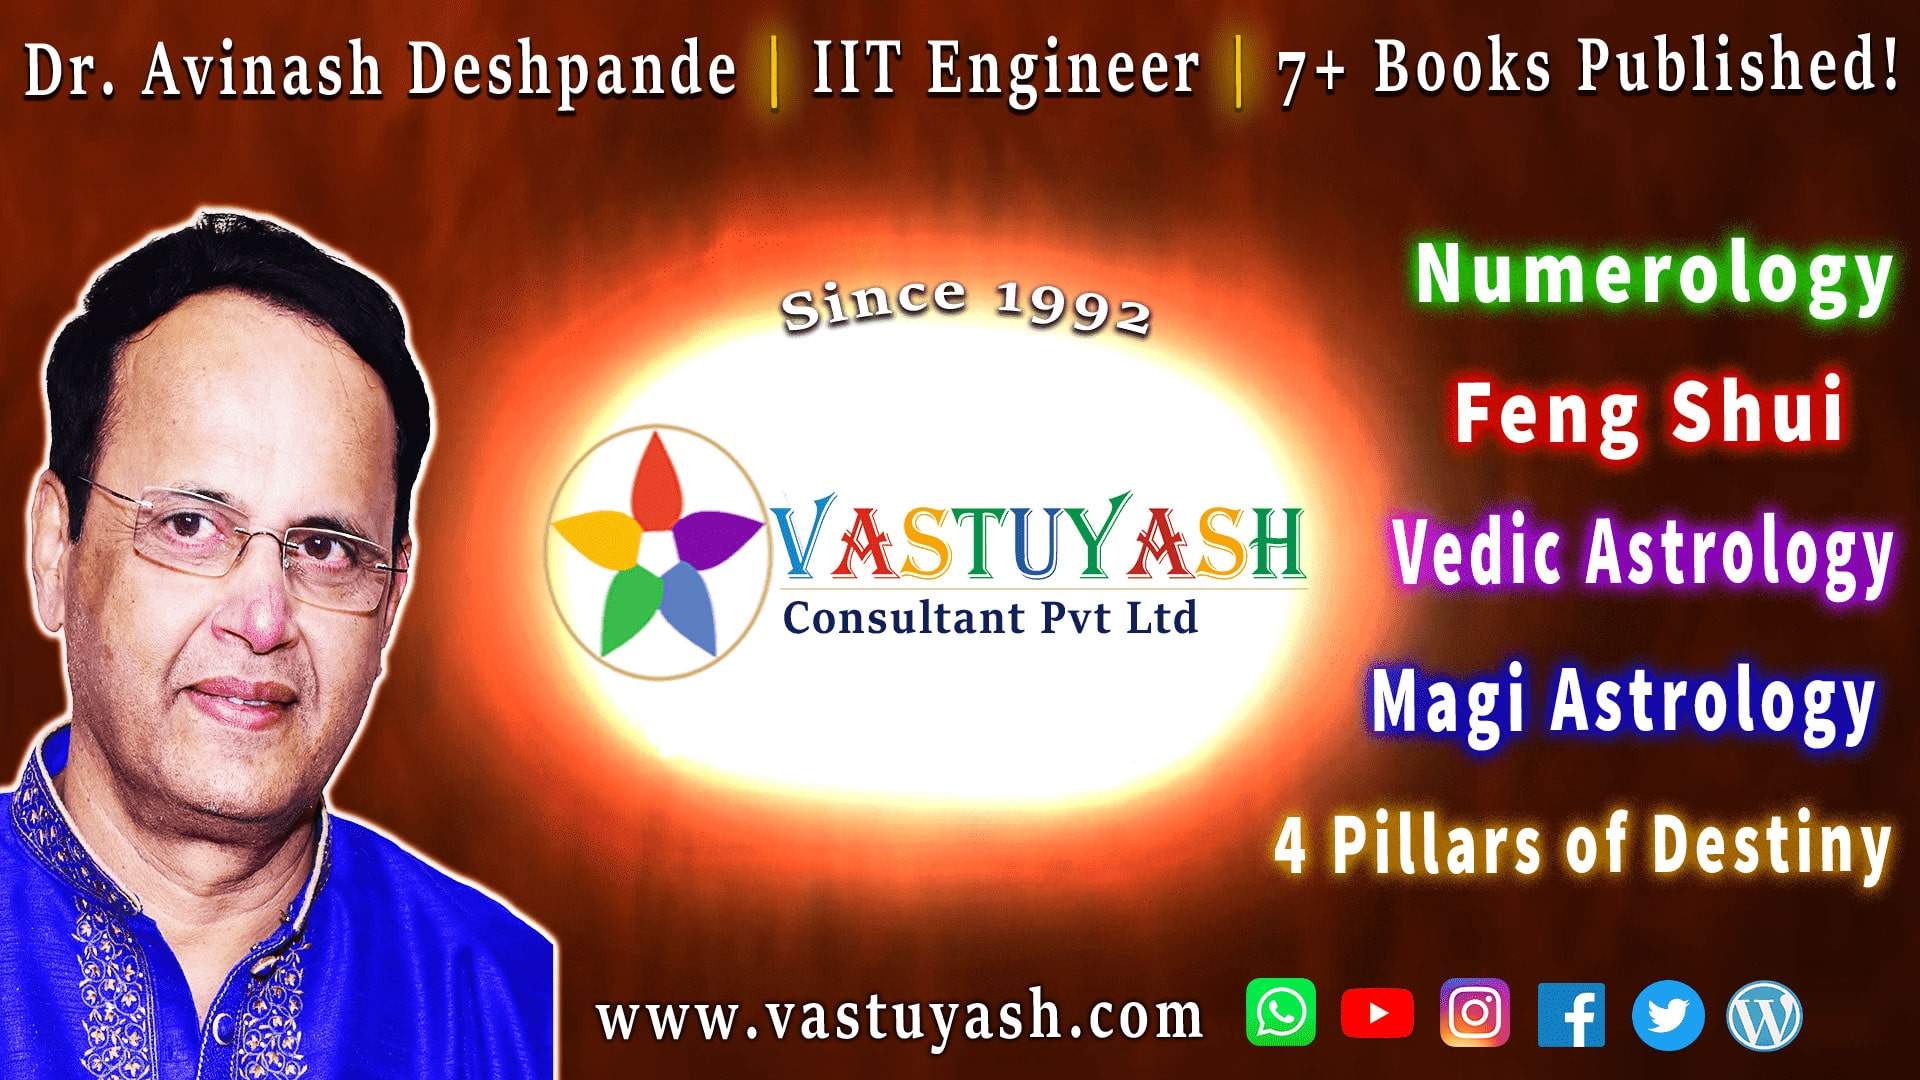 Astrology, Fengshui, Numerology, Vedic Astrology Consultant in Pune India